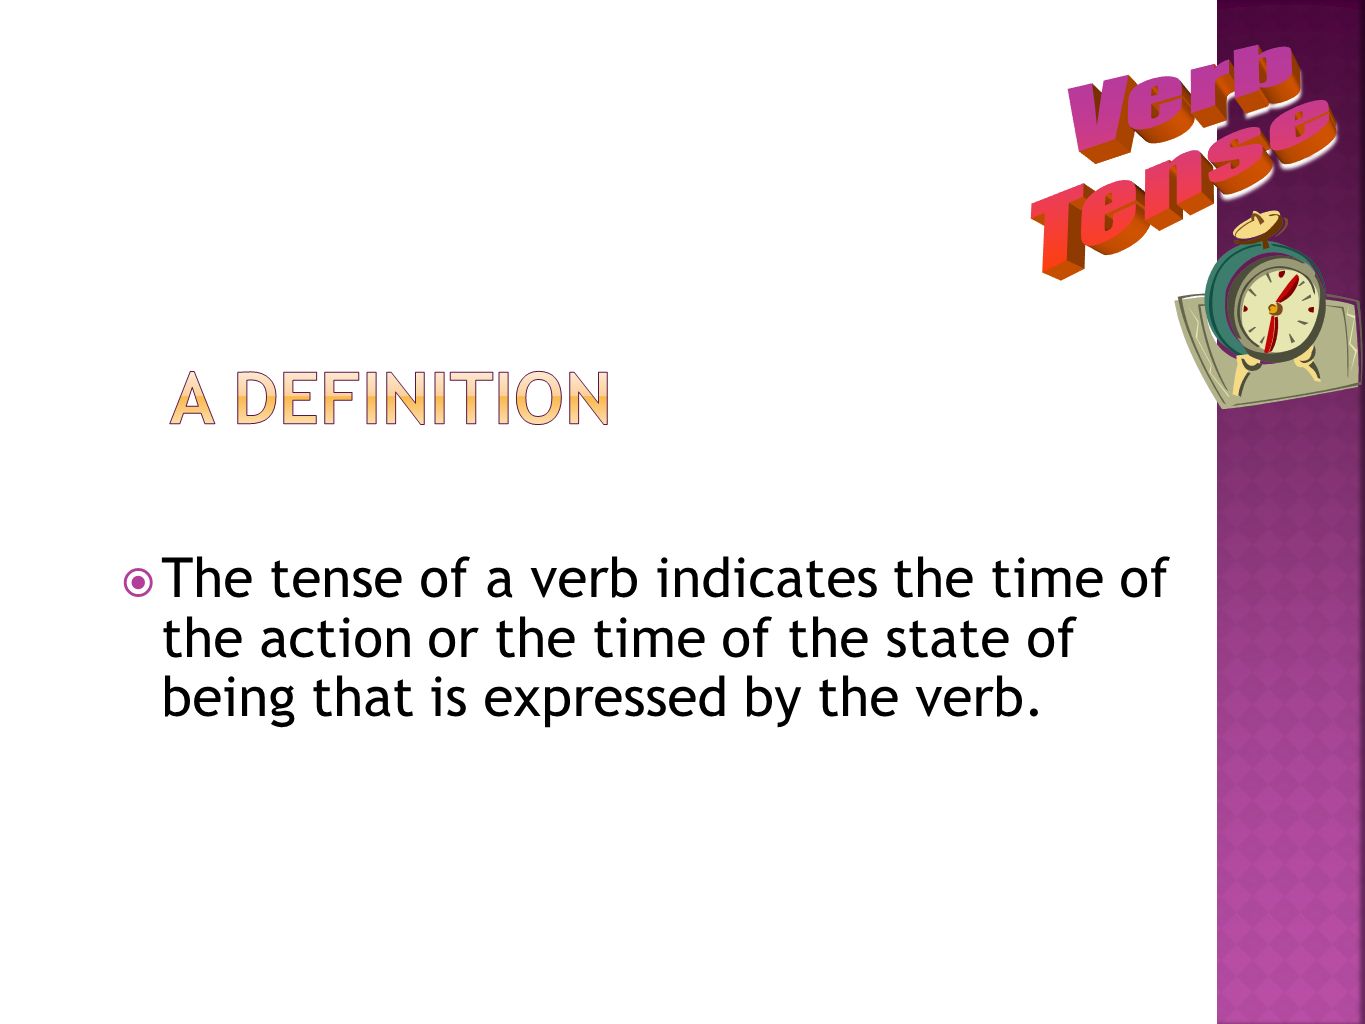 A Definition The tense of a verb indicates the time of the action or the time of the state of being that is expressed by the verb.